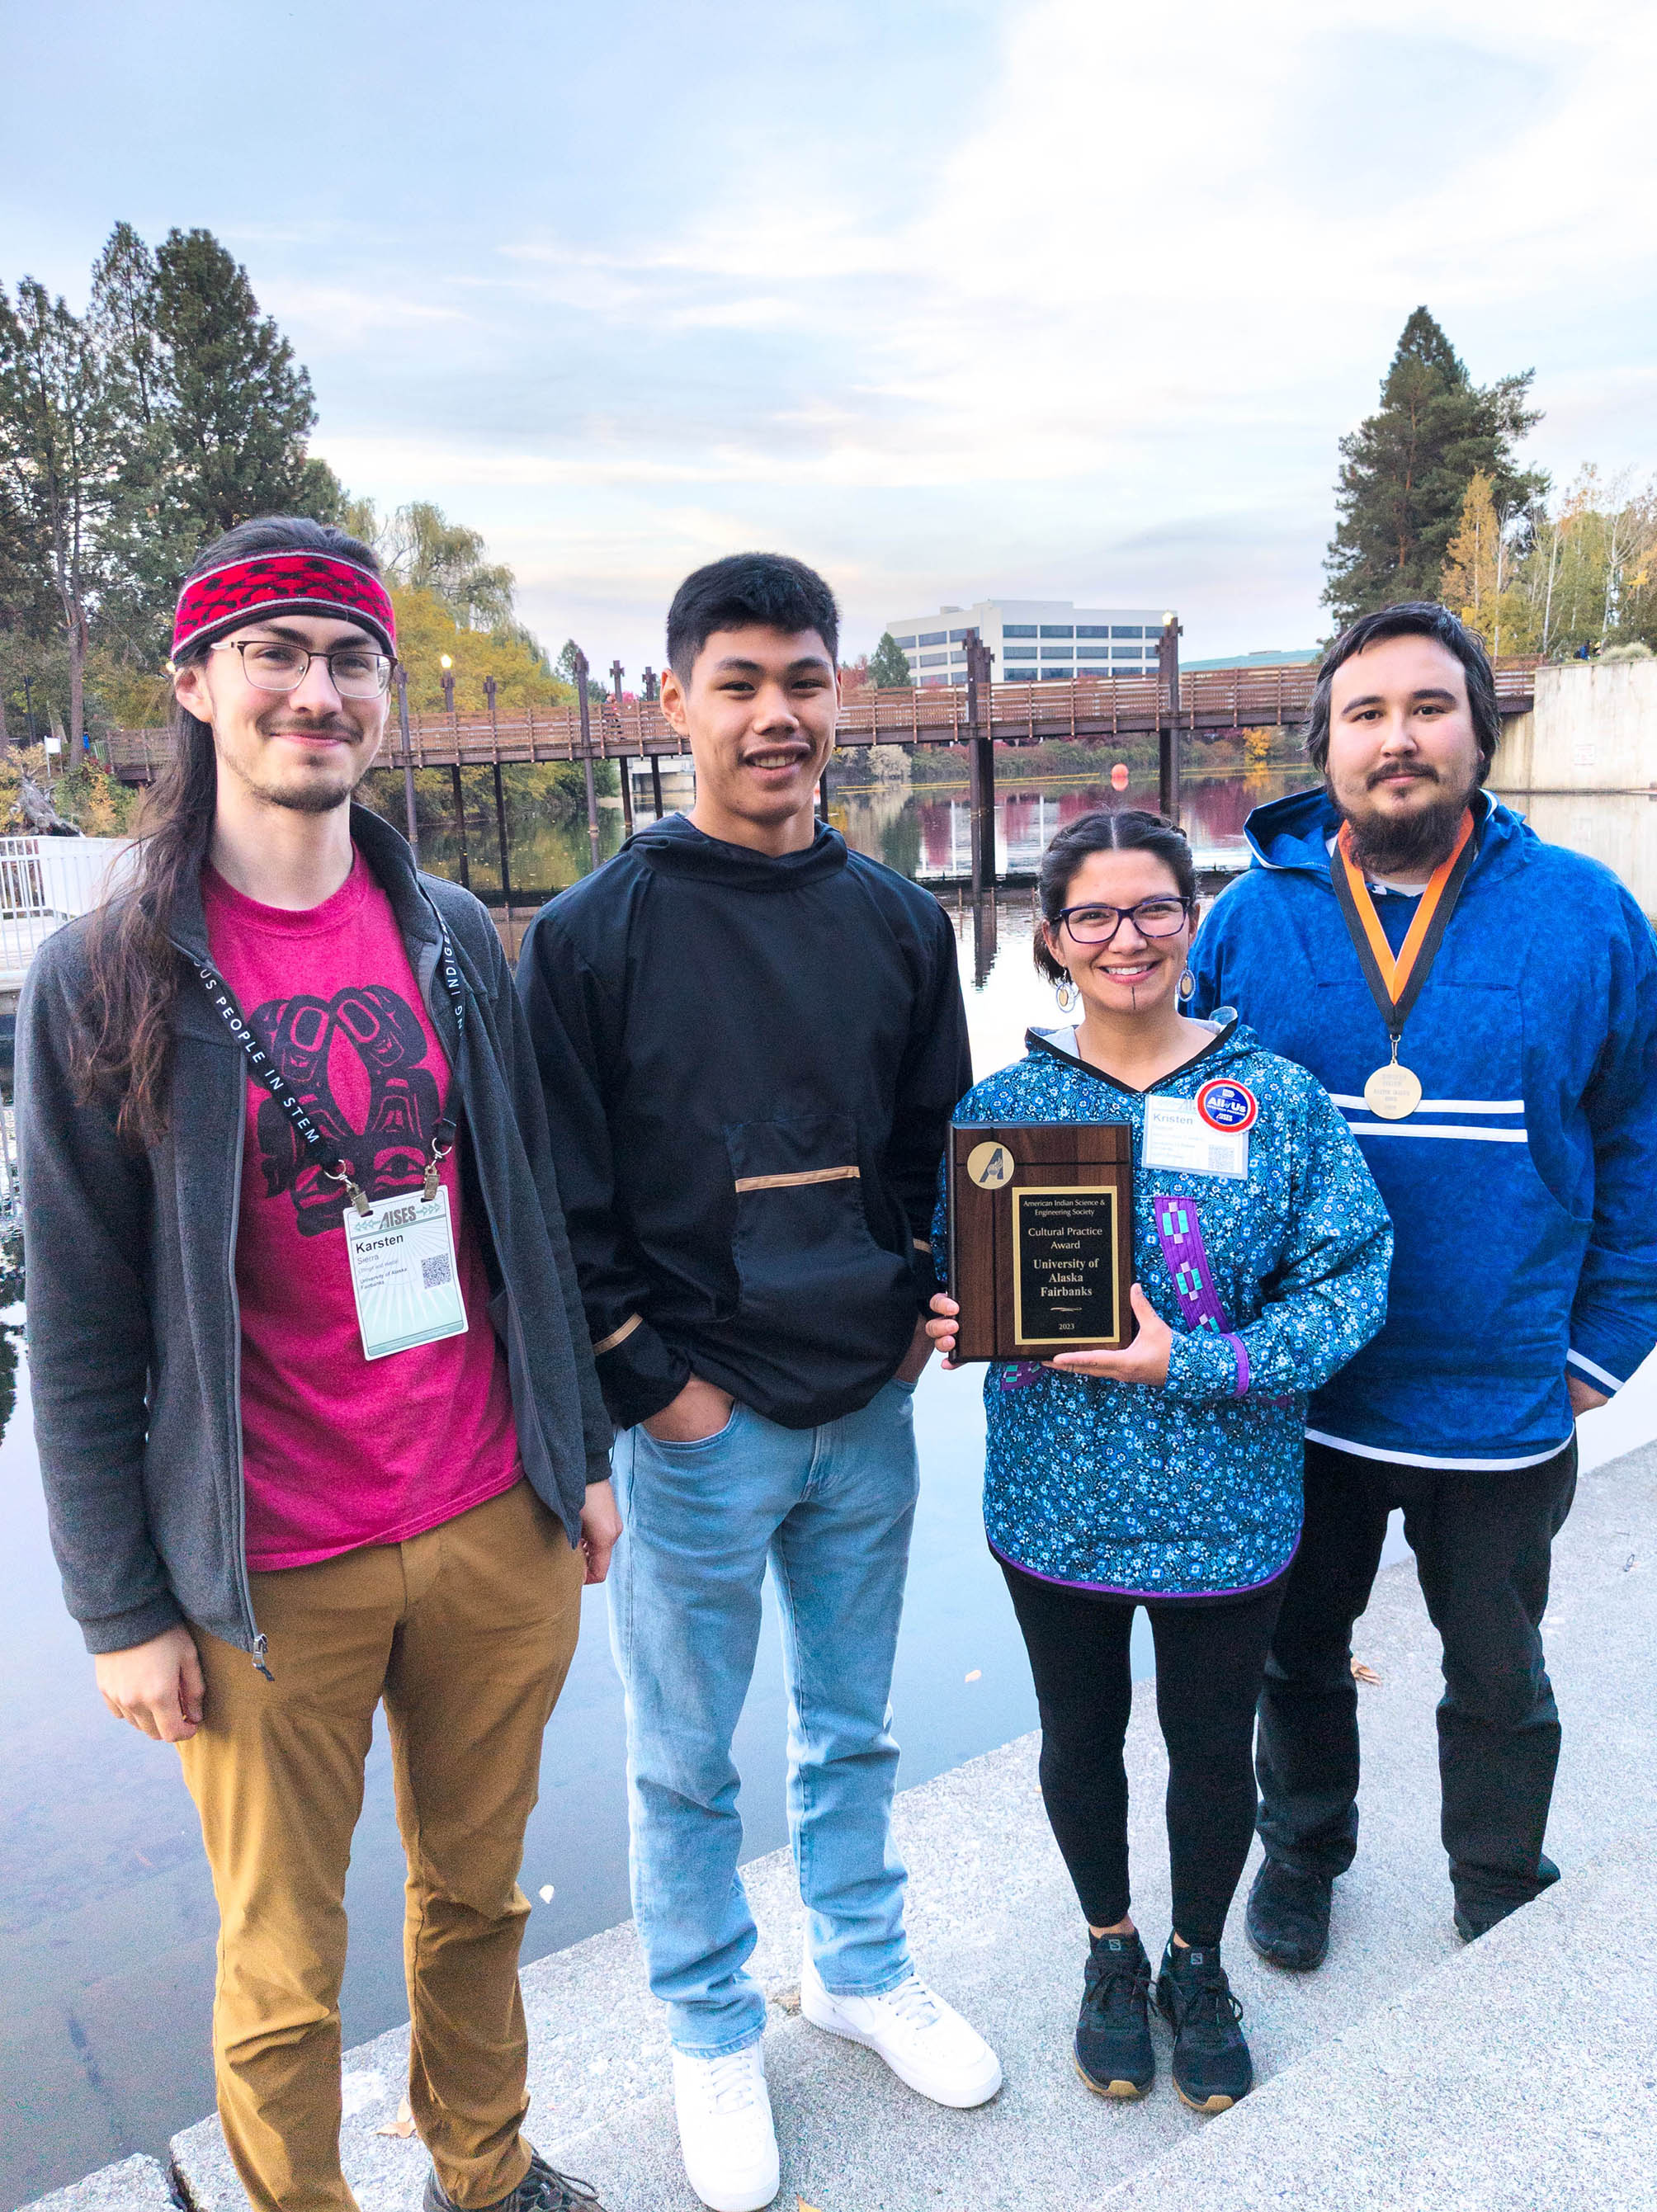 UAF AISES Chapter attendees pose with the Cultural Practice Chapter Award. From left to right: Karsten Sierra, Asa Pitka, Kristen Reece and Bax Bond.